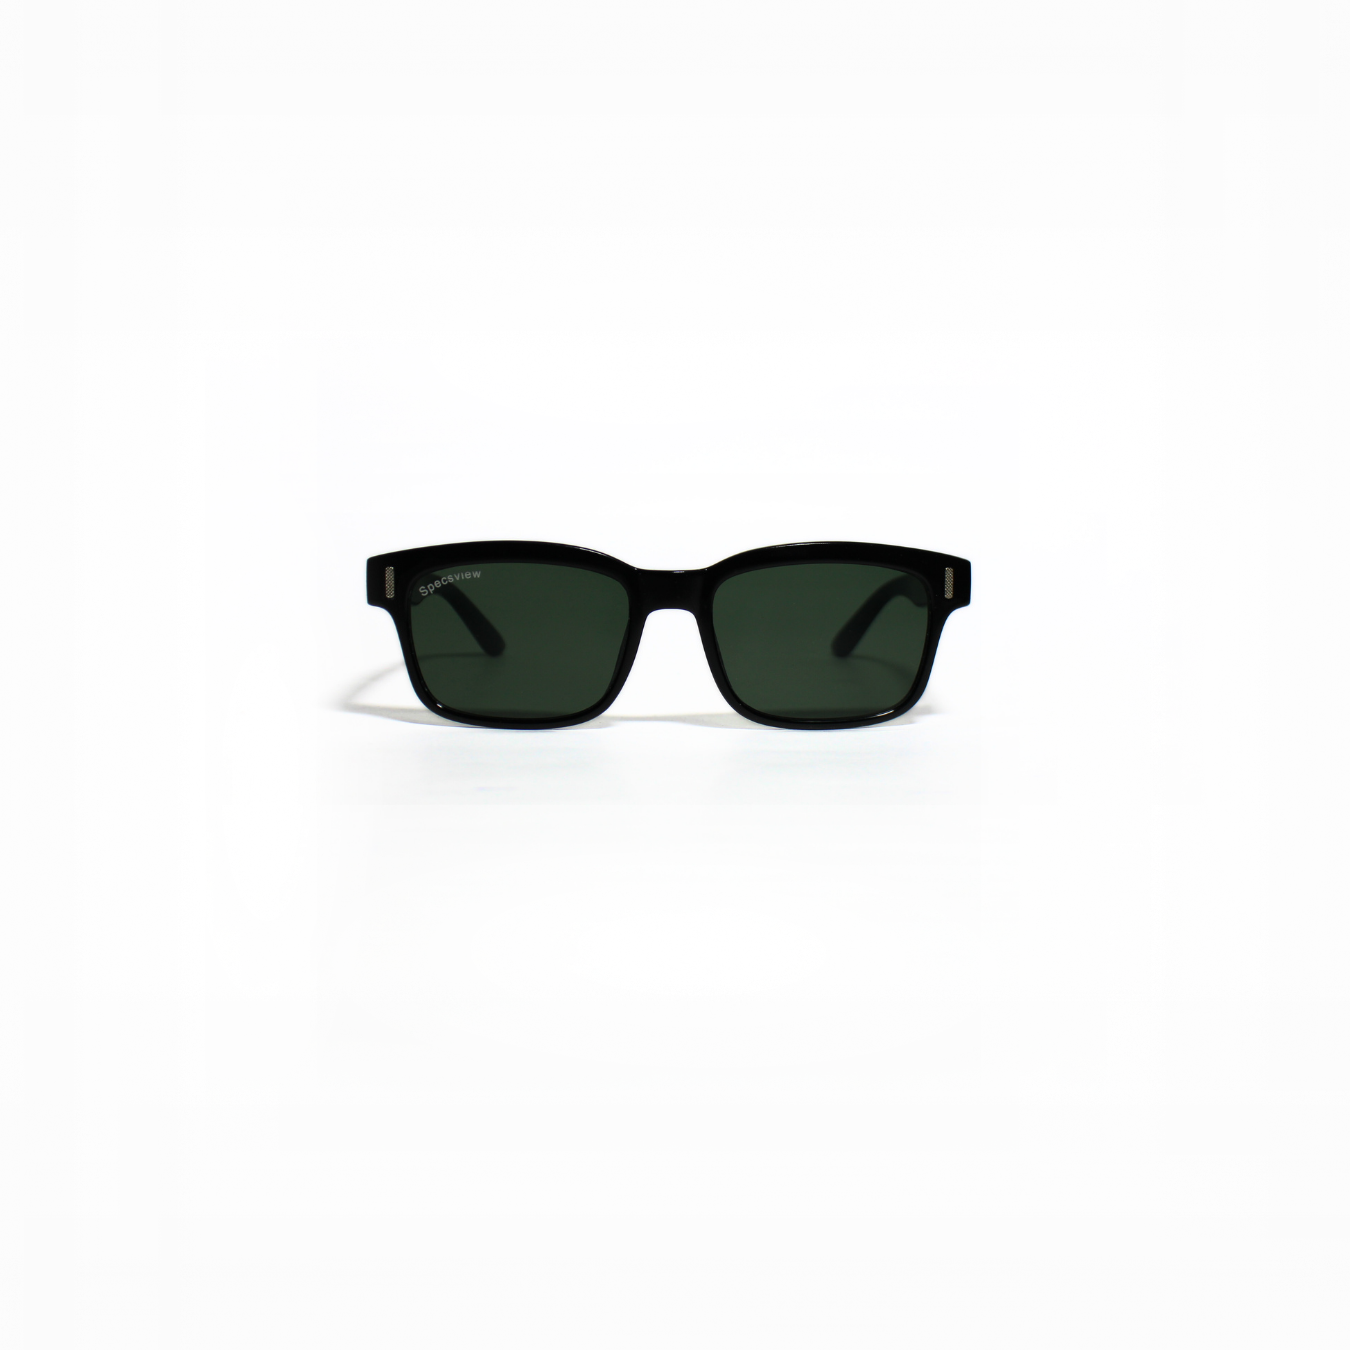 SPECTRE//002 I Sunglasses for Men and Women - Specsview